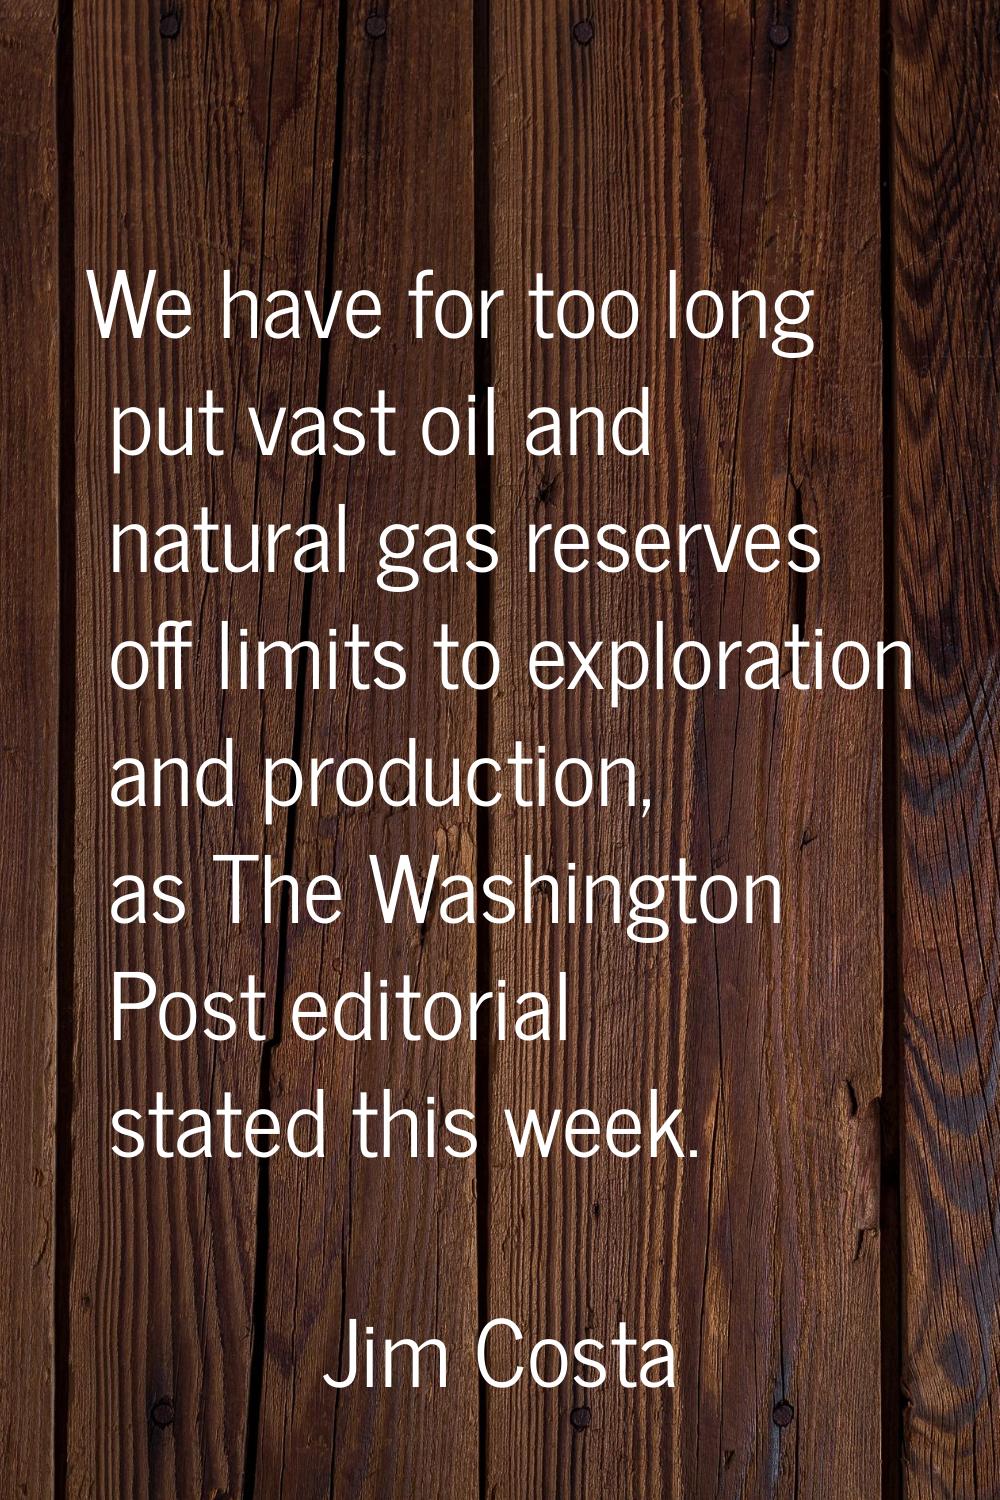 We have for too long put vast oil and natural gas reserves off limits to exploration and production